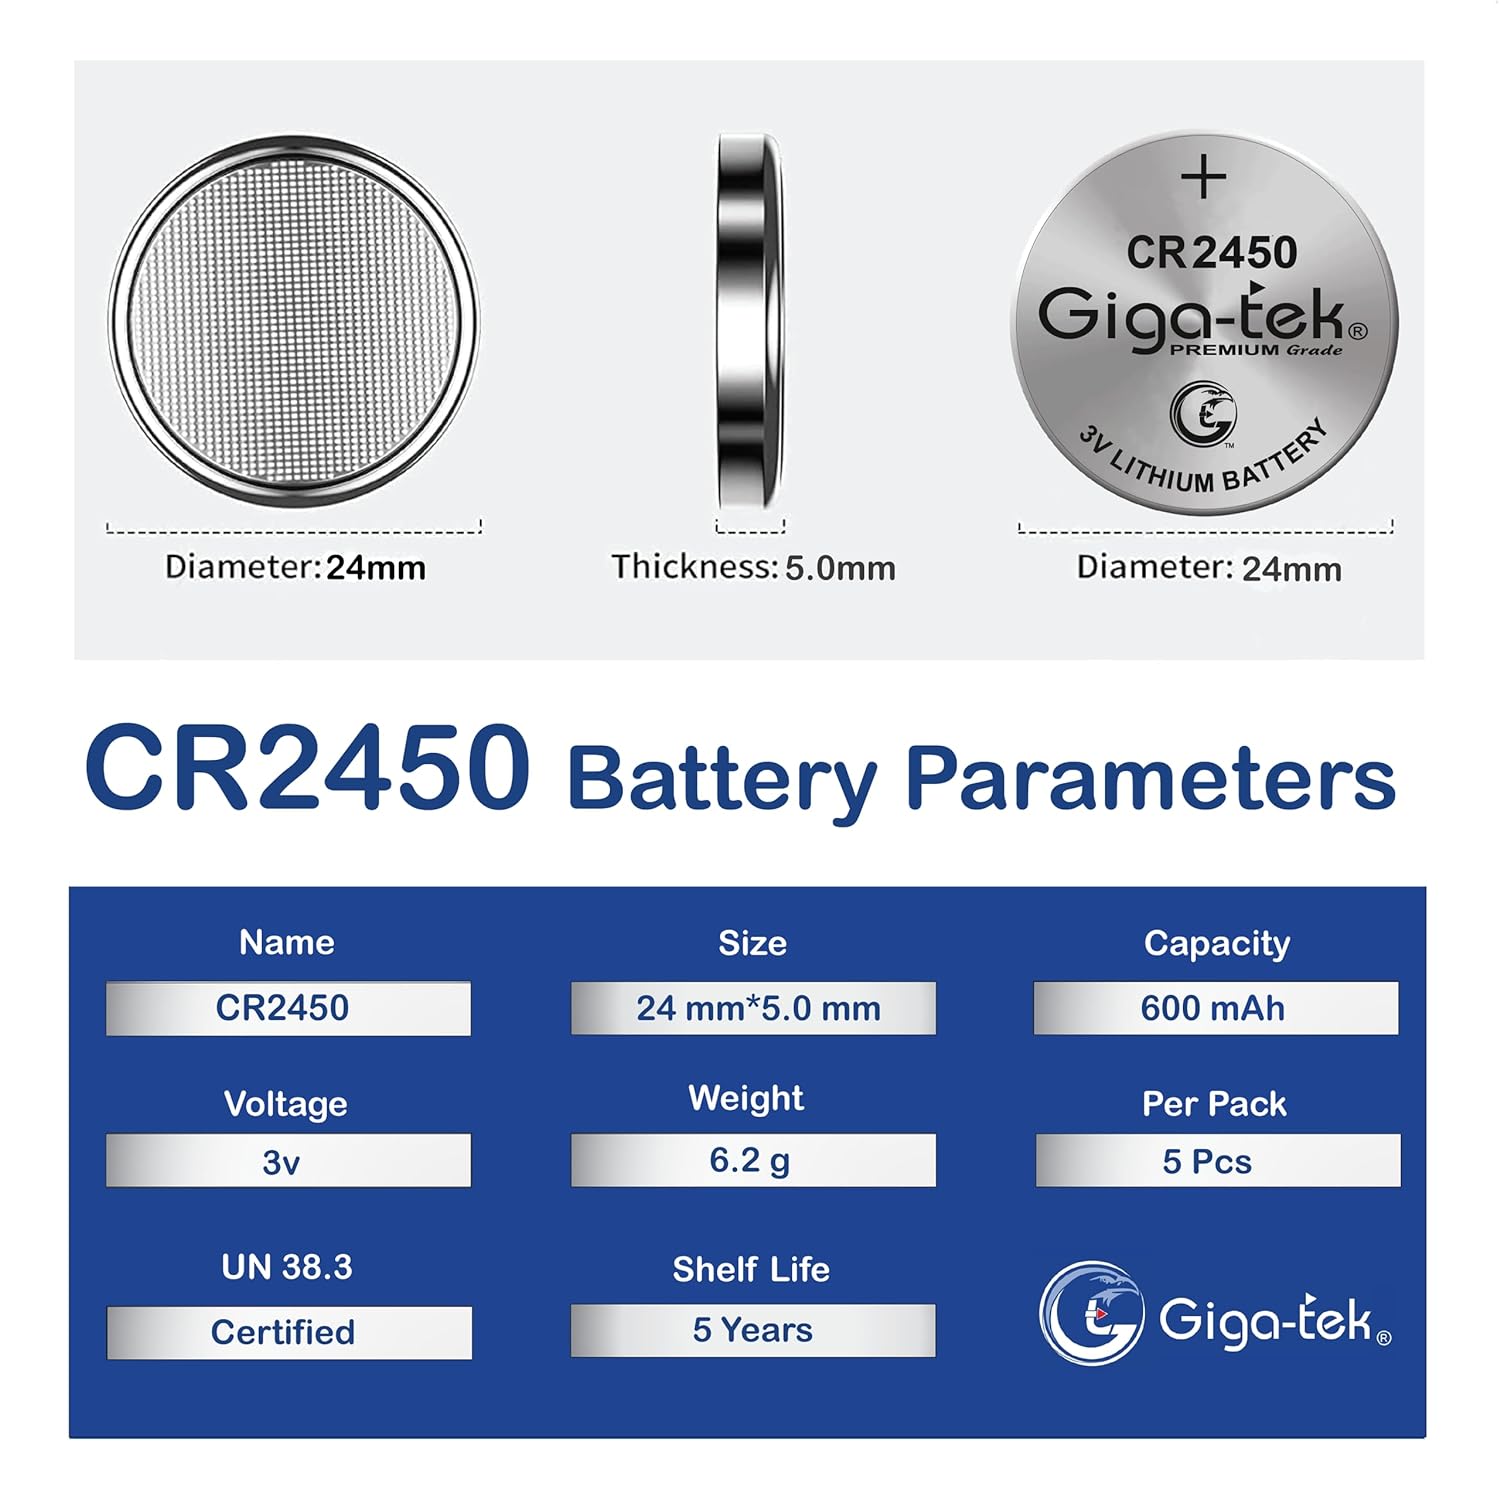 CR2450 Lithium Button Cell Batteries 1 Pack